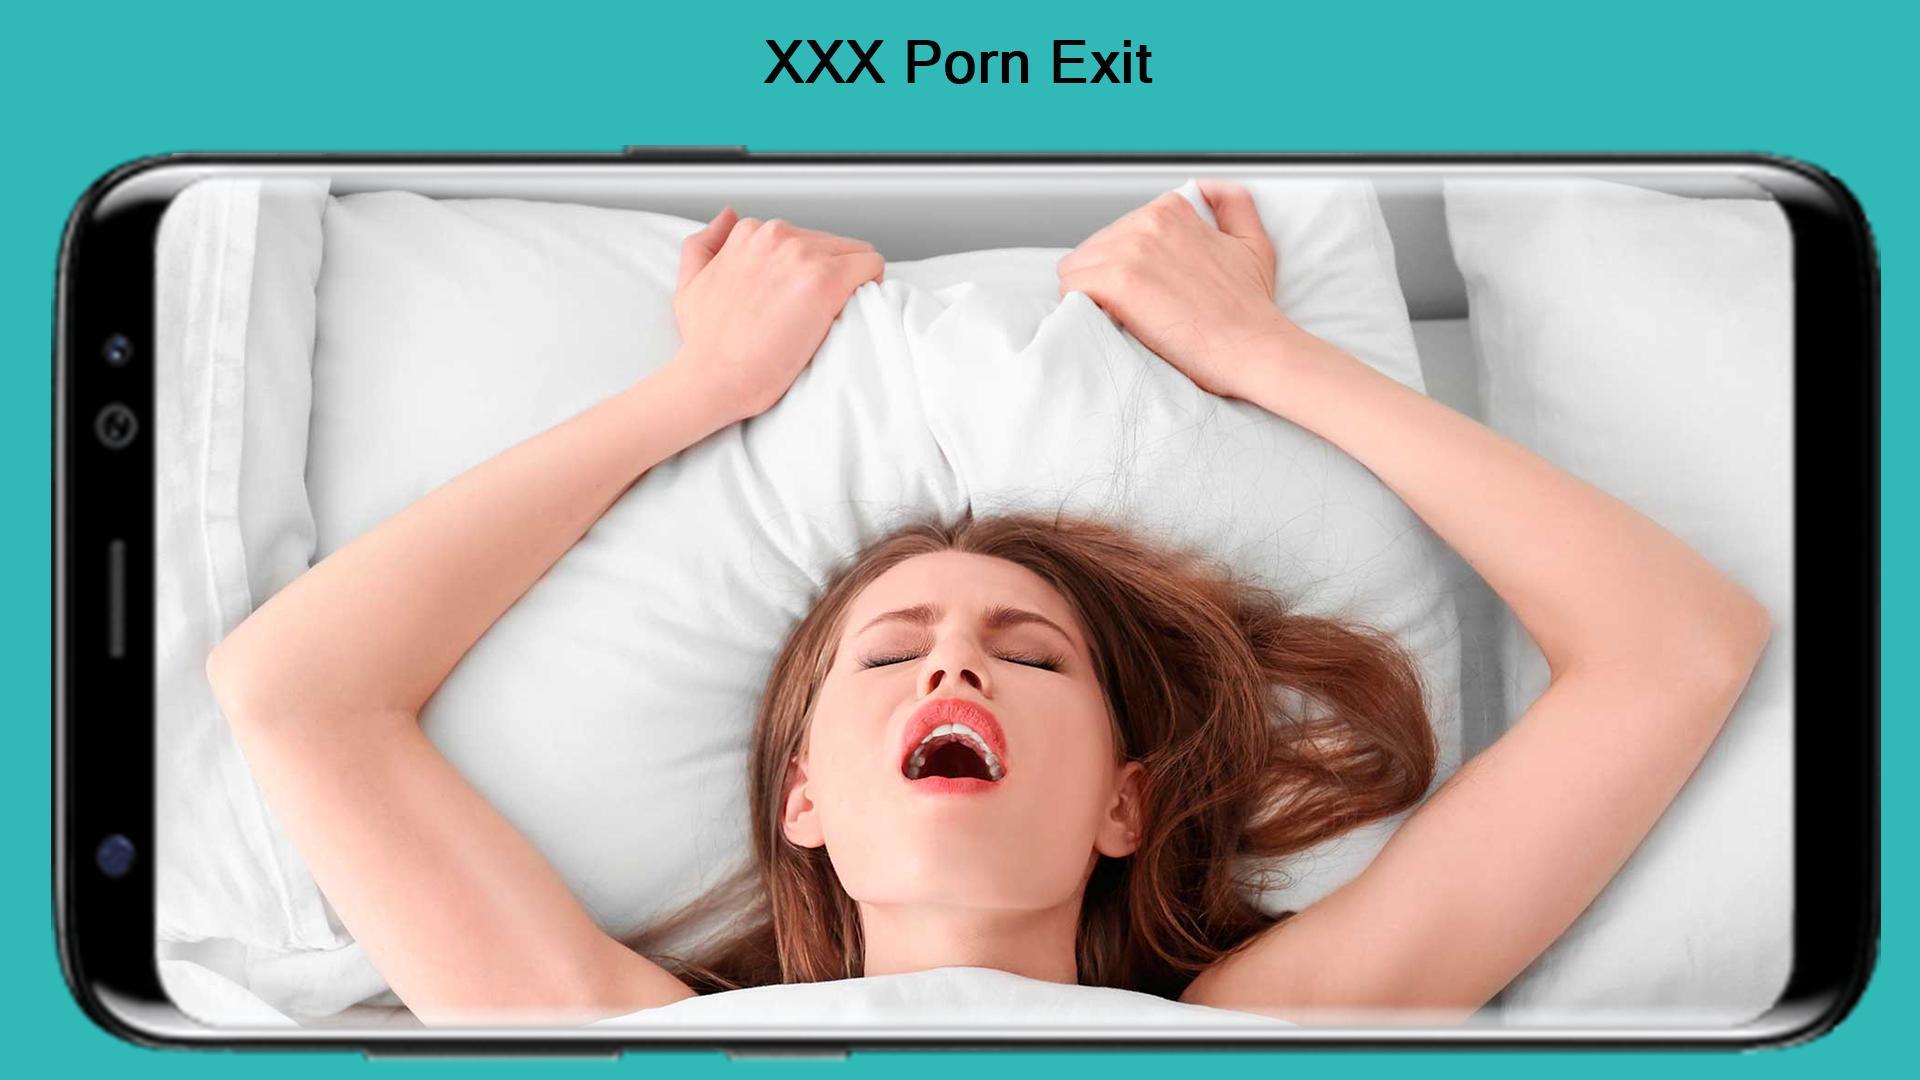 Quit Porn Addiction Stop Watching Porn Jav for Android - APK ...